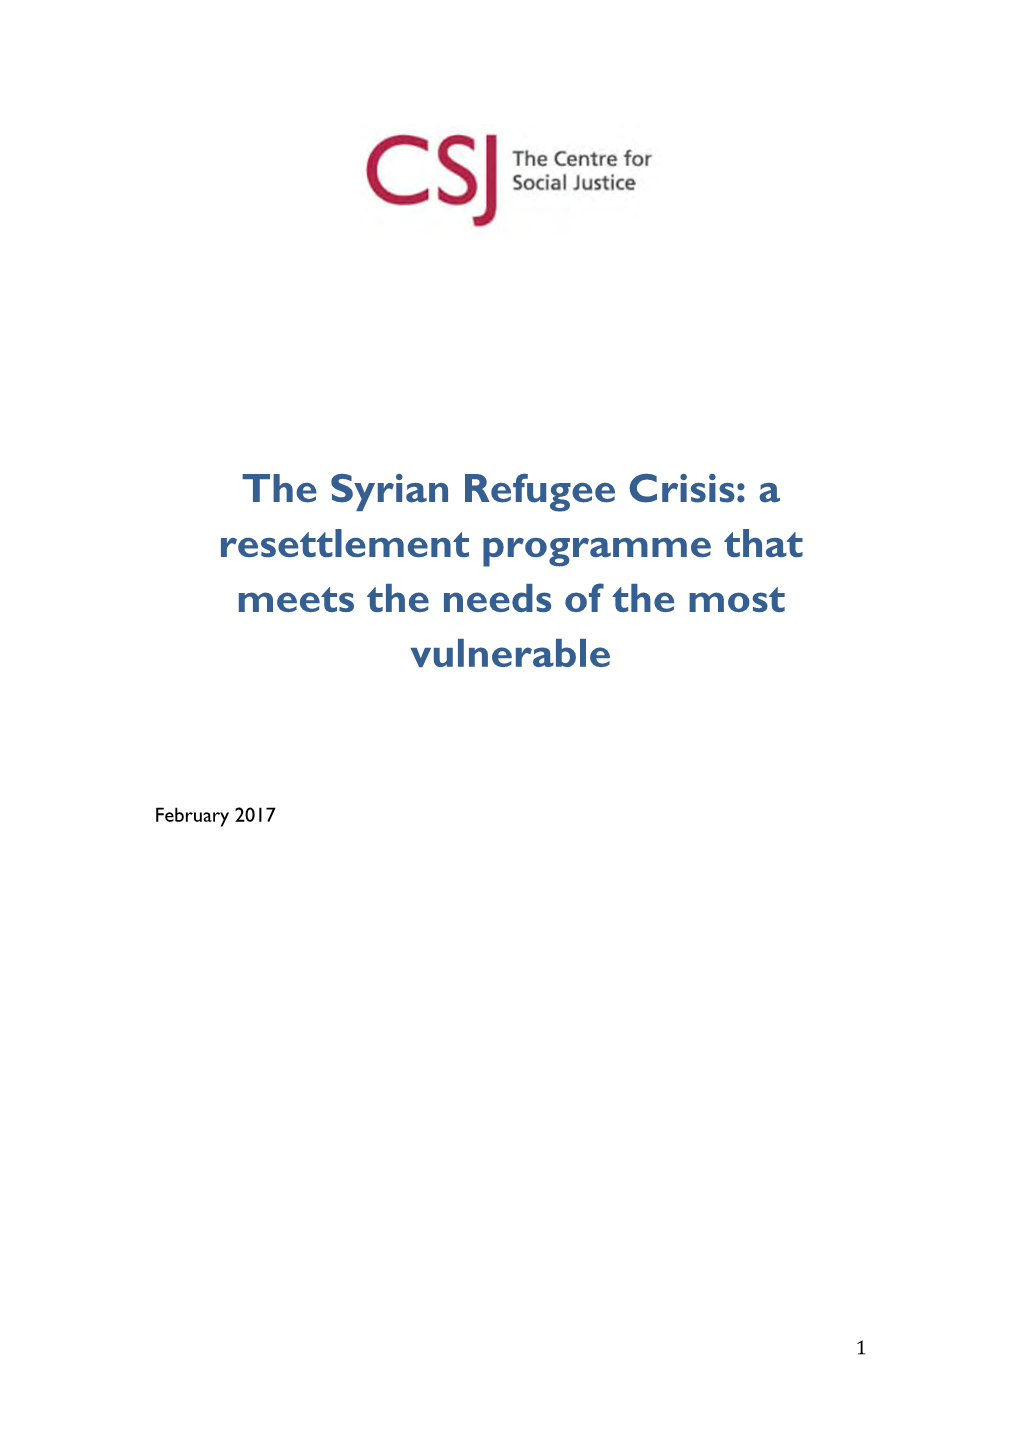 The Syrian Refugee Crisis: a Resettlement Programme That Meets the Needs of the Most Vulnerable